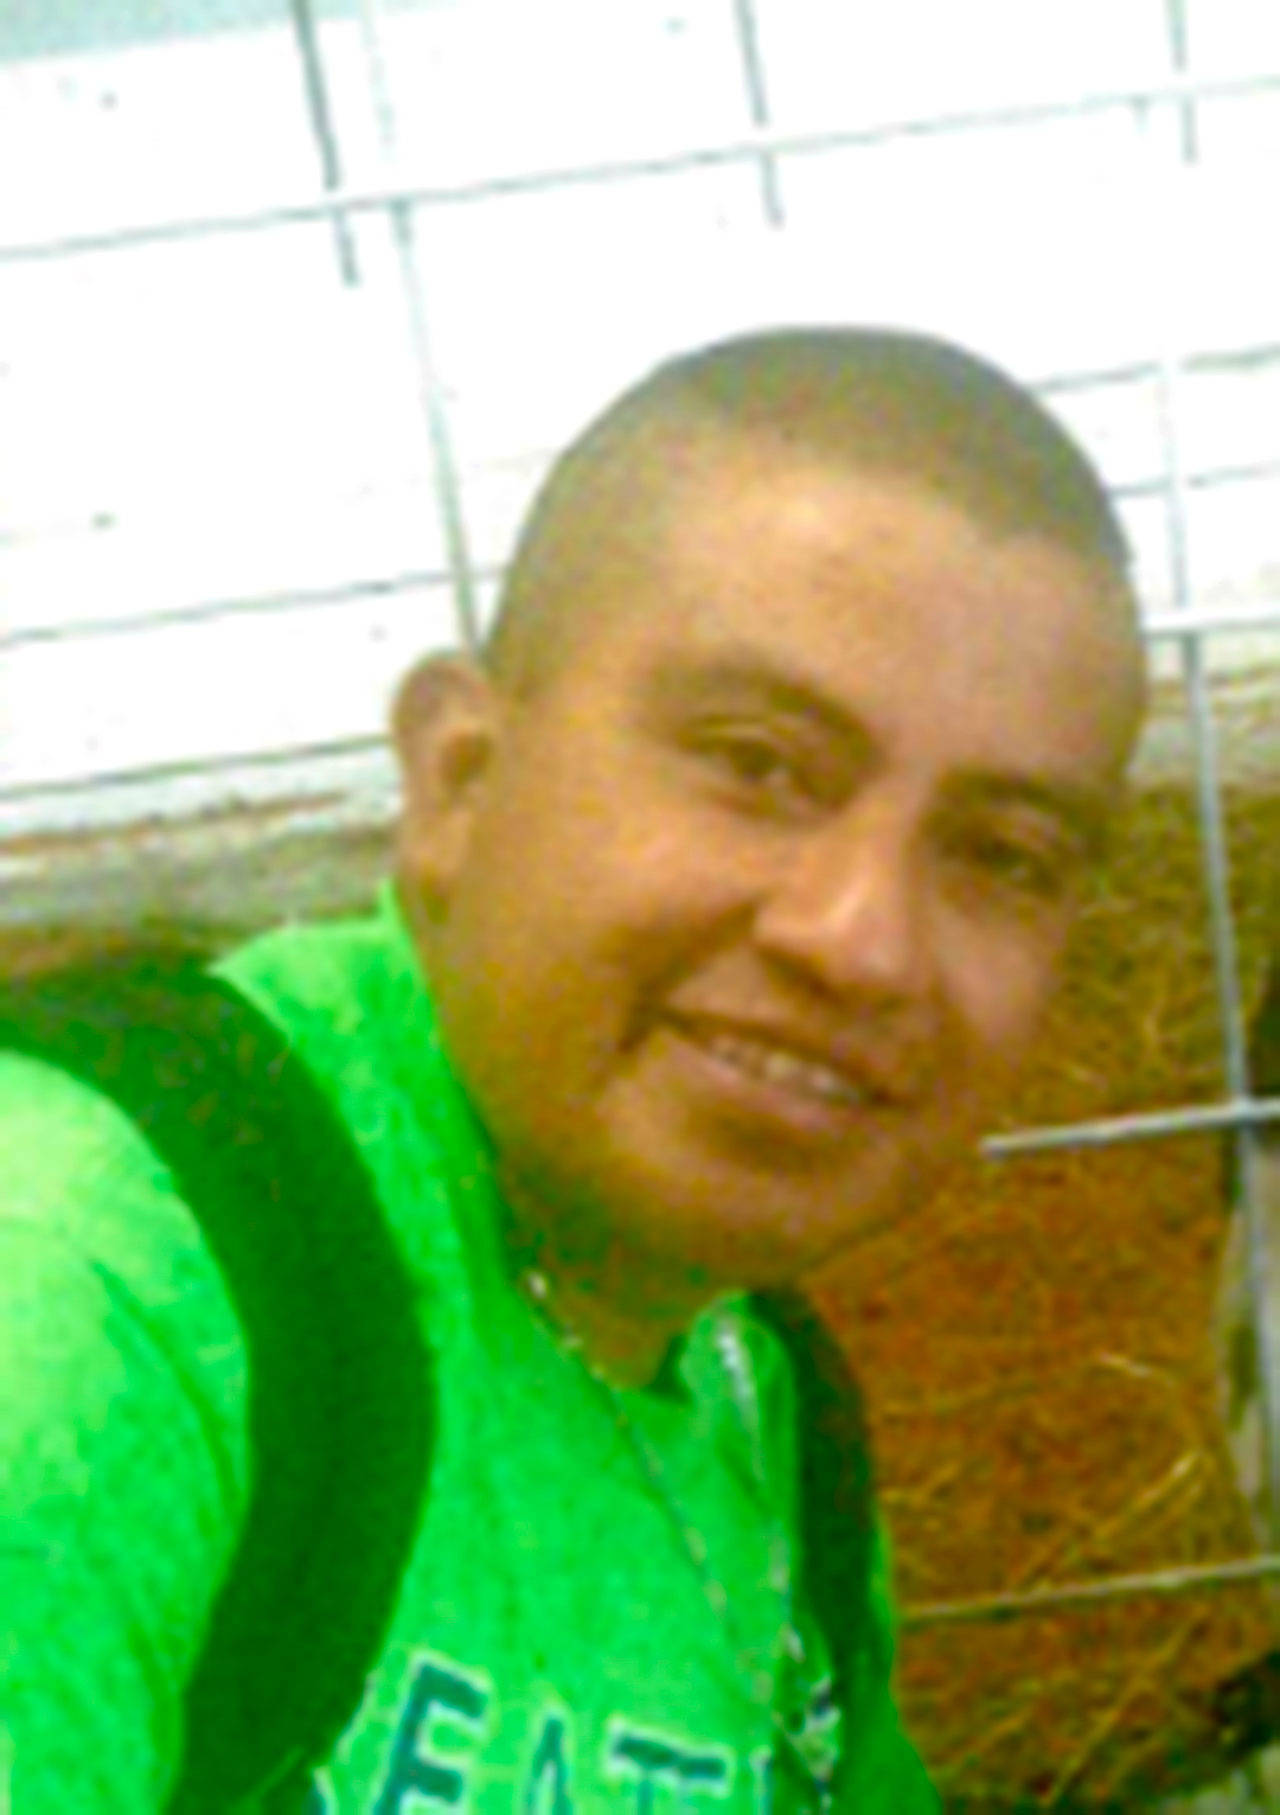 (Courtesy Aberdeen Police) Apolinar Oporto-Chacon, 33, was last seen going to pick salal near Aberdeen.